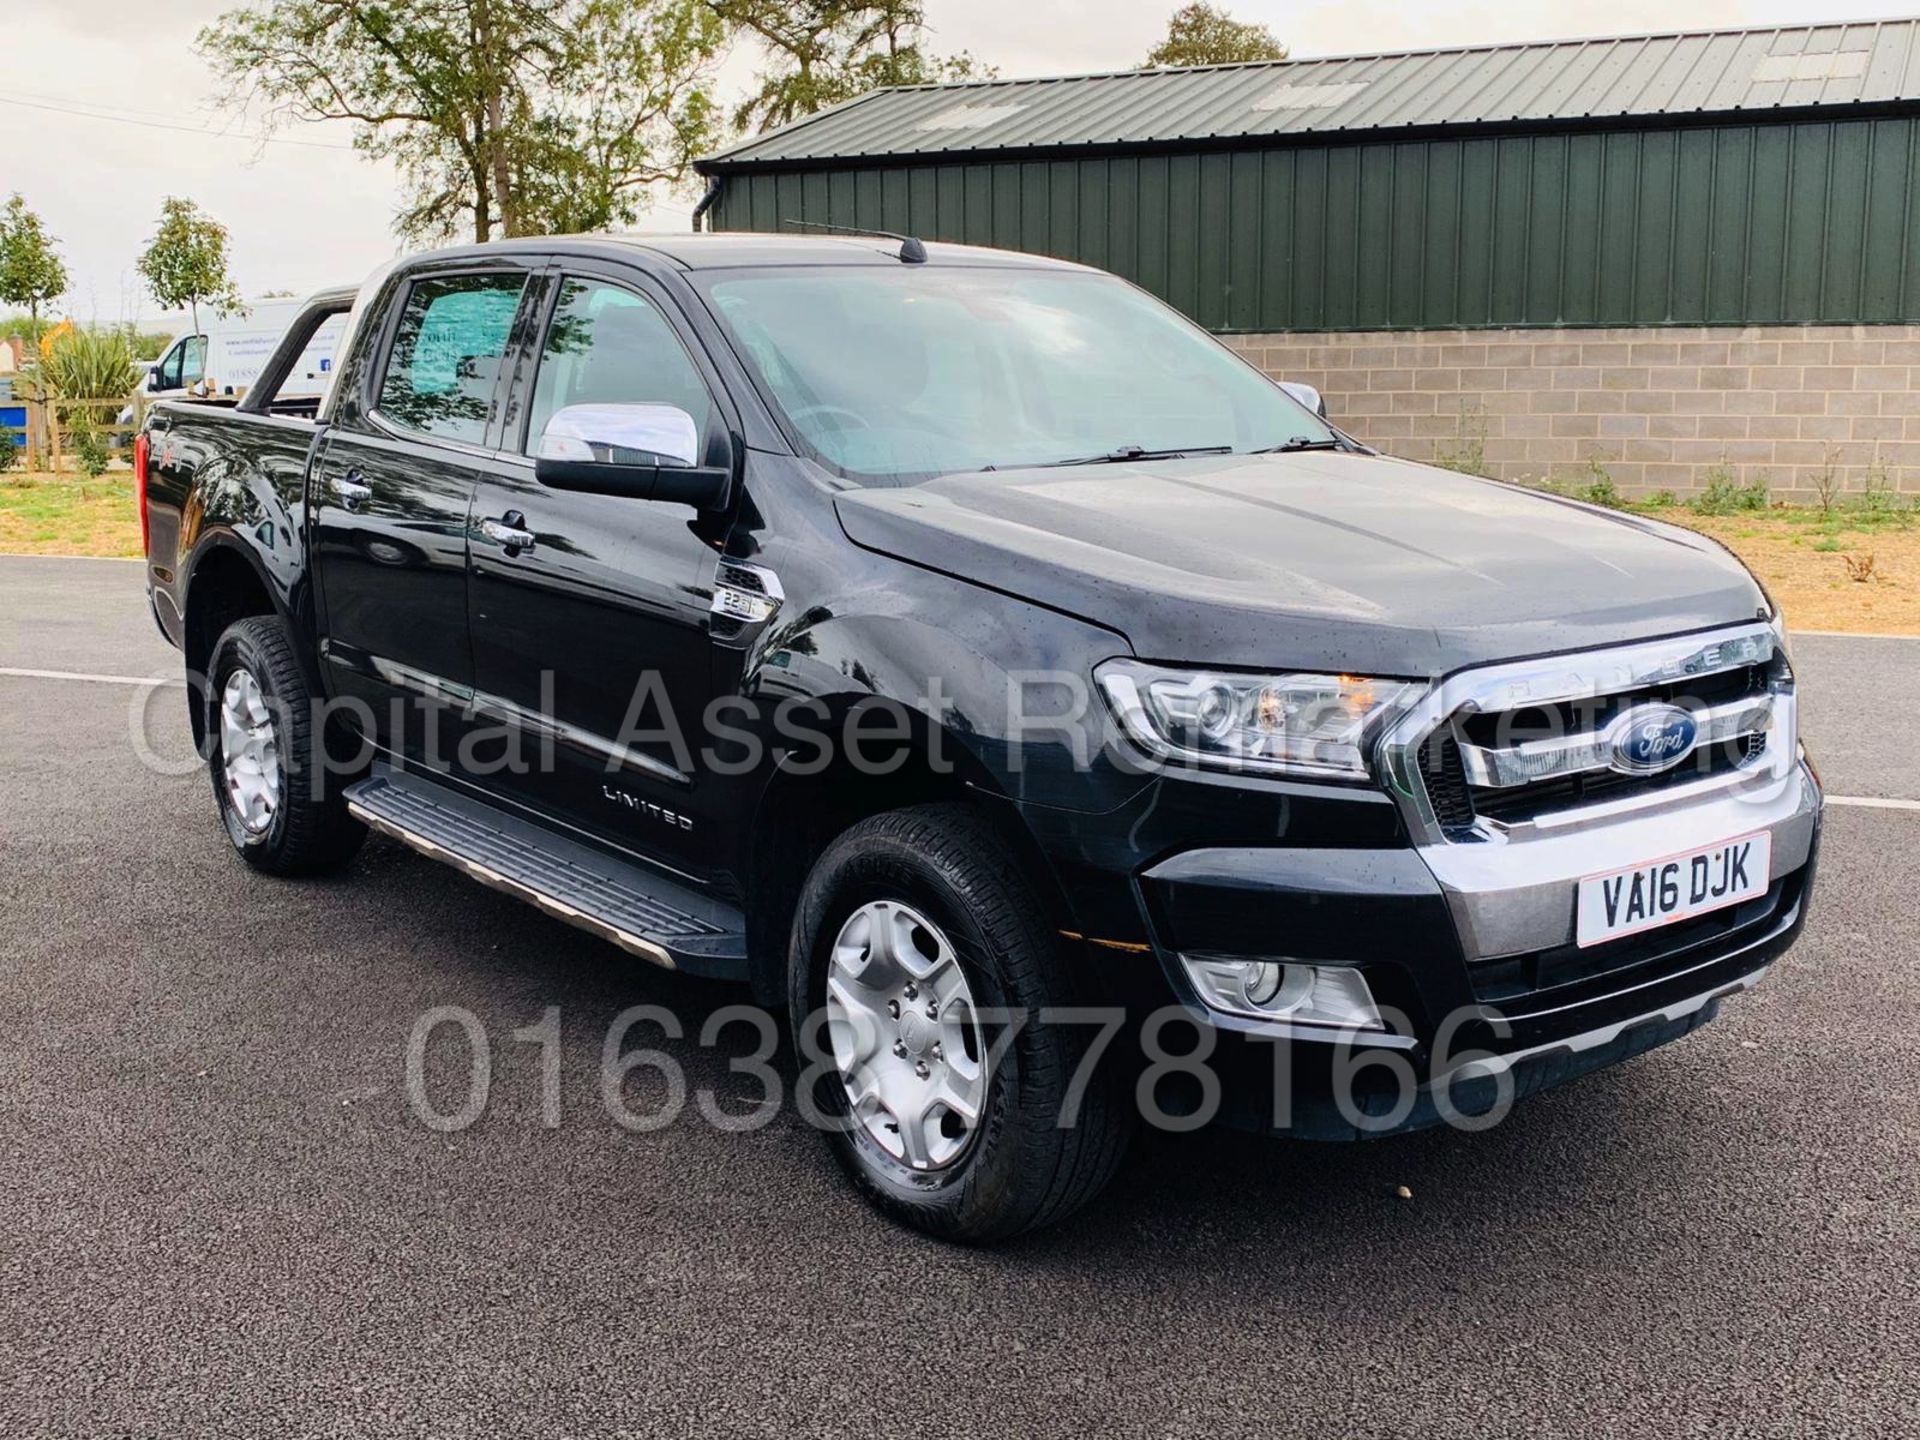 (On Sale) FORD RANGER *LIMITED EDITION* DOUBLE CAB PICK-UP (2016) '2.2 TDCI - 160 BHP' *HUGE SPEC* - Image 12 of 46